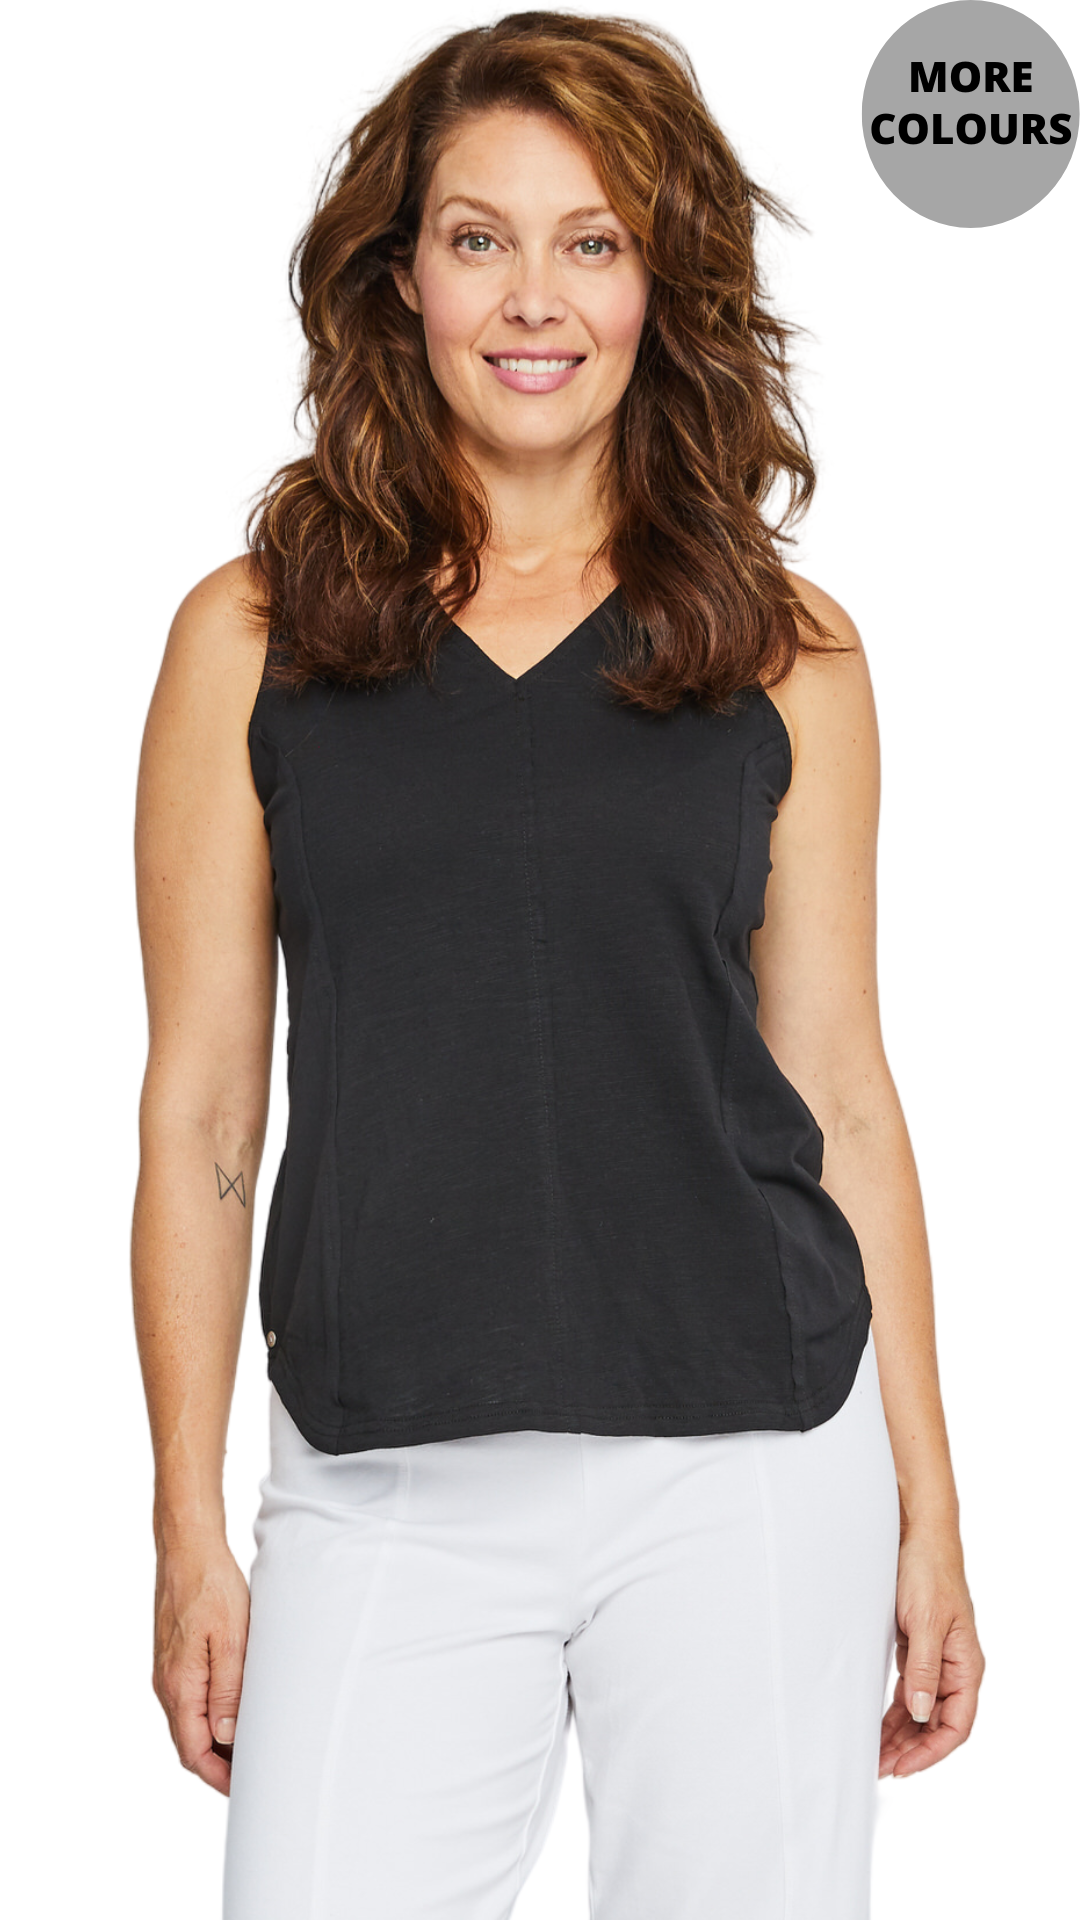 Reversible Round or V-Neck Tank. Style NB12167